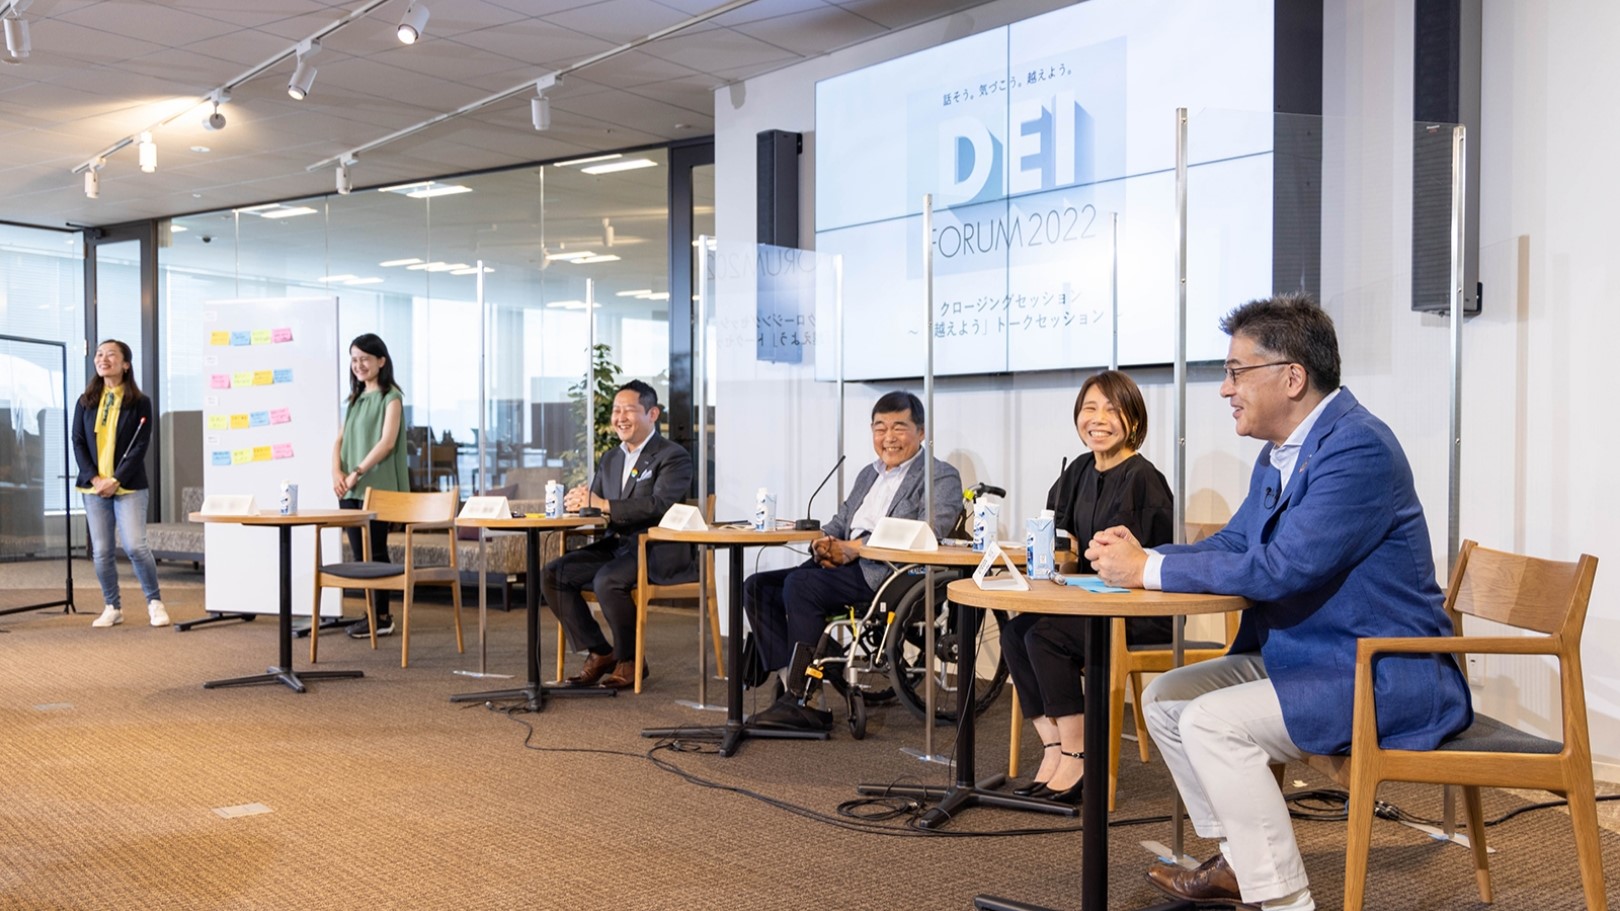 Photo: Group DEI Forum 2021. Moderator and speakers Yuki Kusumi and Shigeki Mishima. On the large screen in the background are several faces of employees participating online. The words "DEI FORUM" appear at the bottom of the photo.